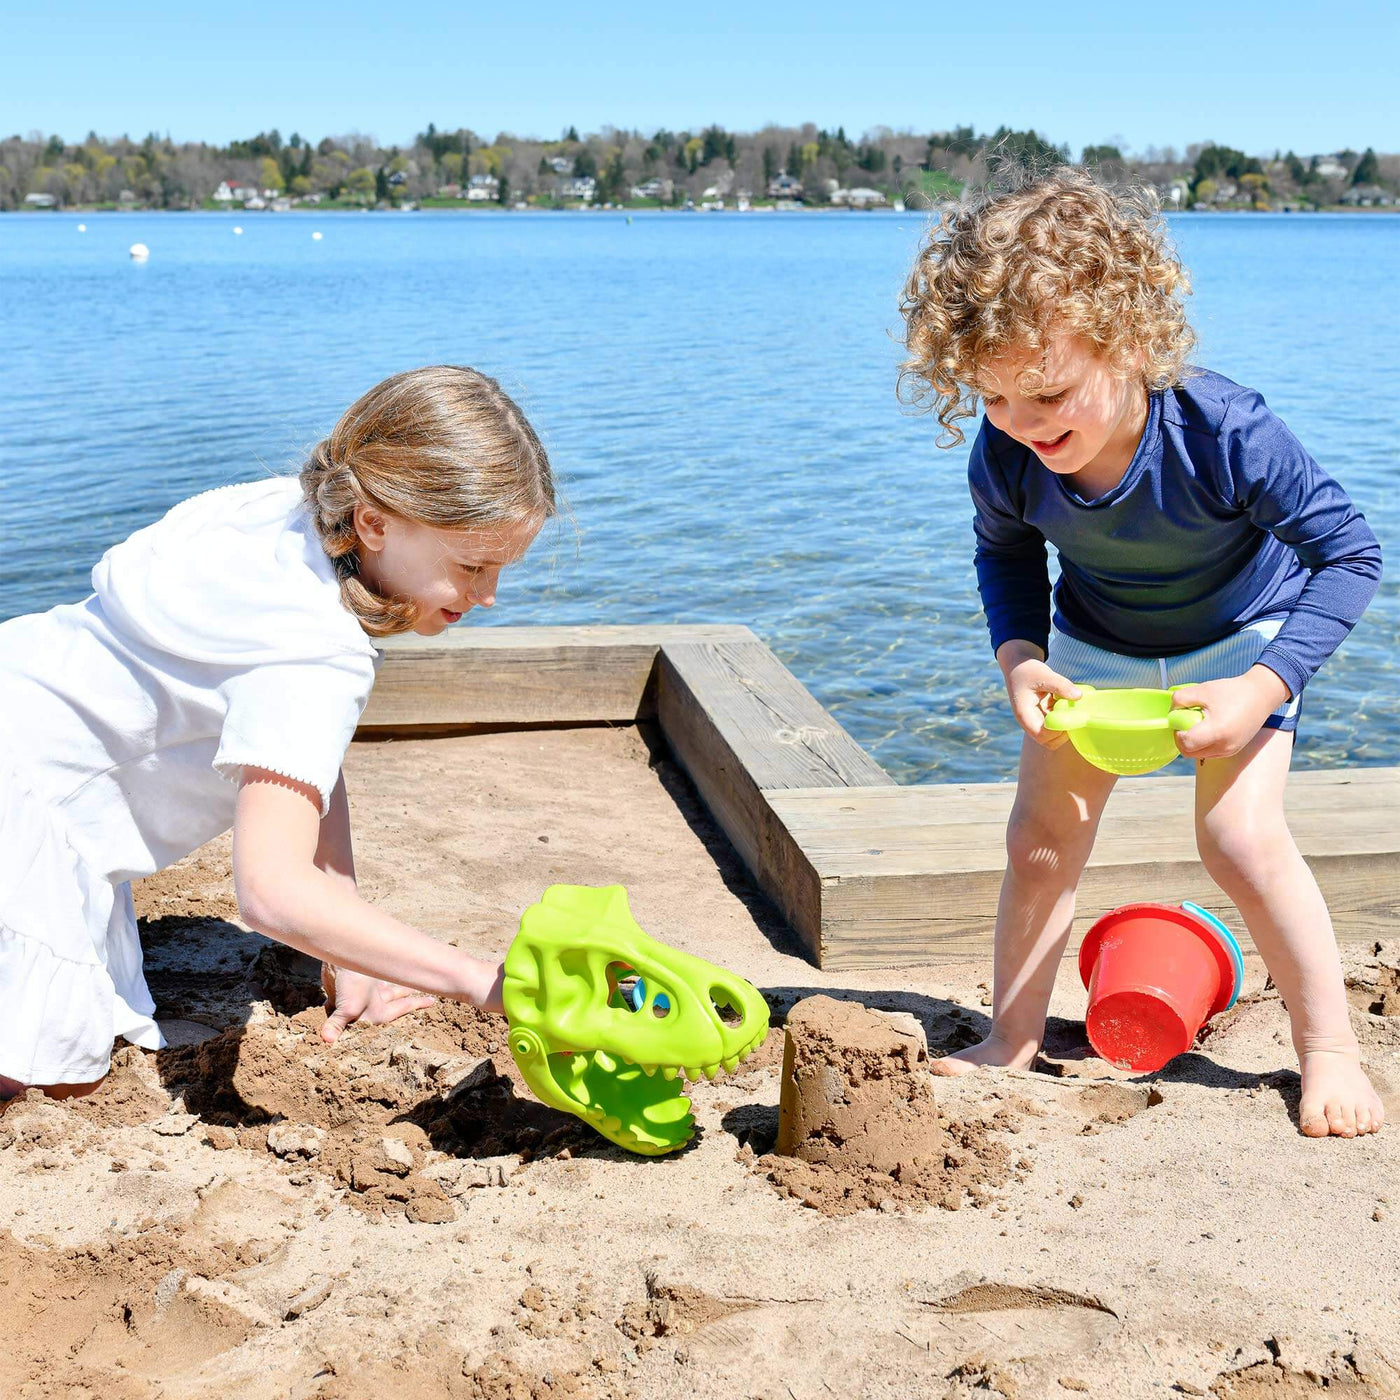 A girl in a white dress playing with green Sand Dino Glove and boy holding green sifter with red bucket laying in the sand and water in the background